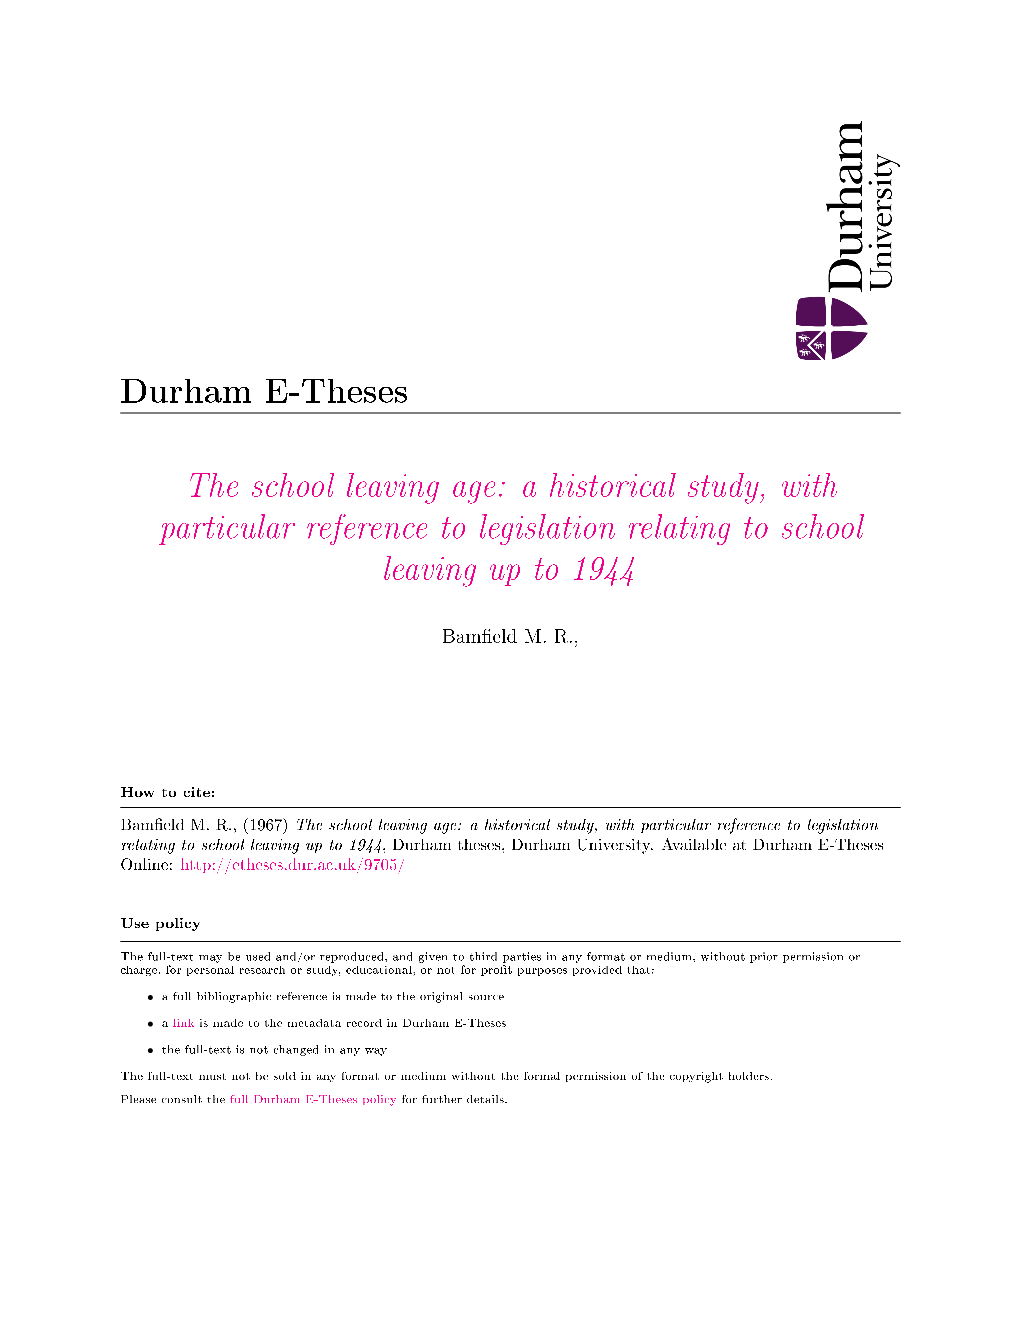 The School Leaving Age: a Historical Study, with Particular Reference to Legislation Relating to School Leaving up to 1944